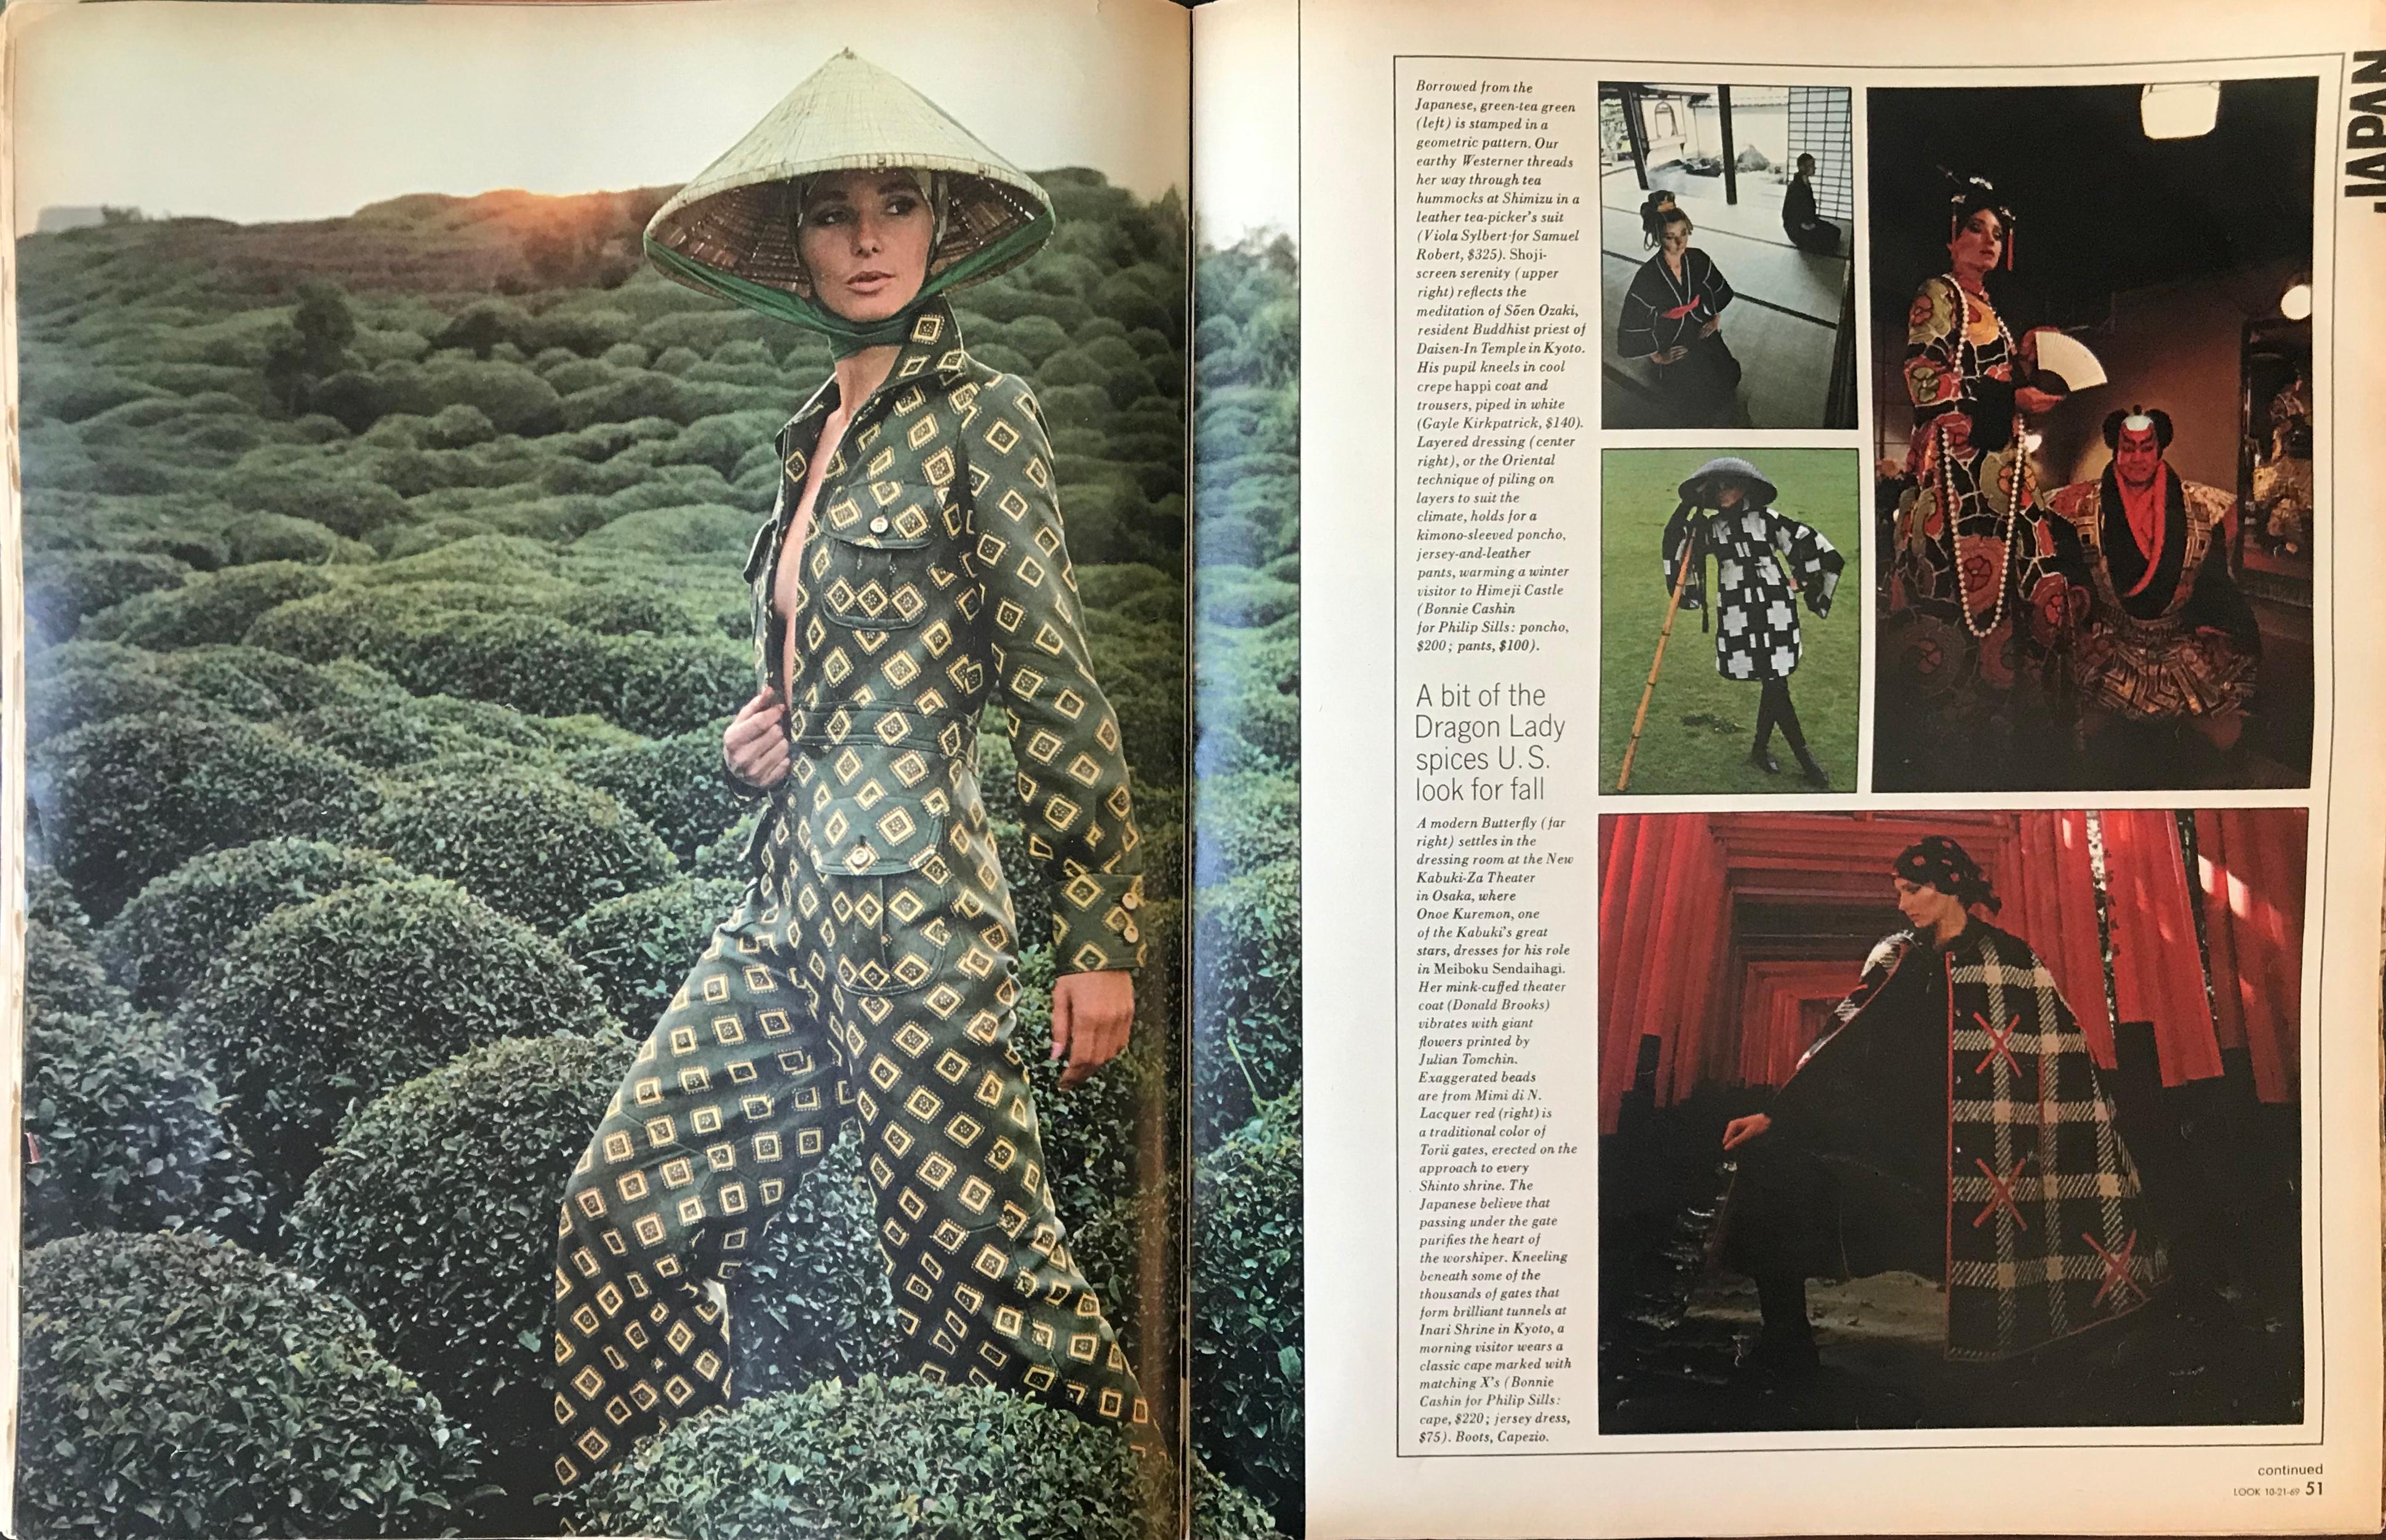 Fashion Photography / Editorial photoshoot for LOOK Magazine 1968 Japan. Limited archival edition of 100.  

About Fred Maroon  
Born in New Brunswick, New Jersey, Fred J. Maroon was a photographer of international renown. His career spanned more